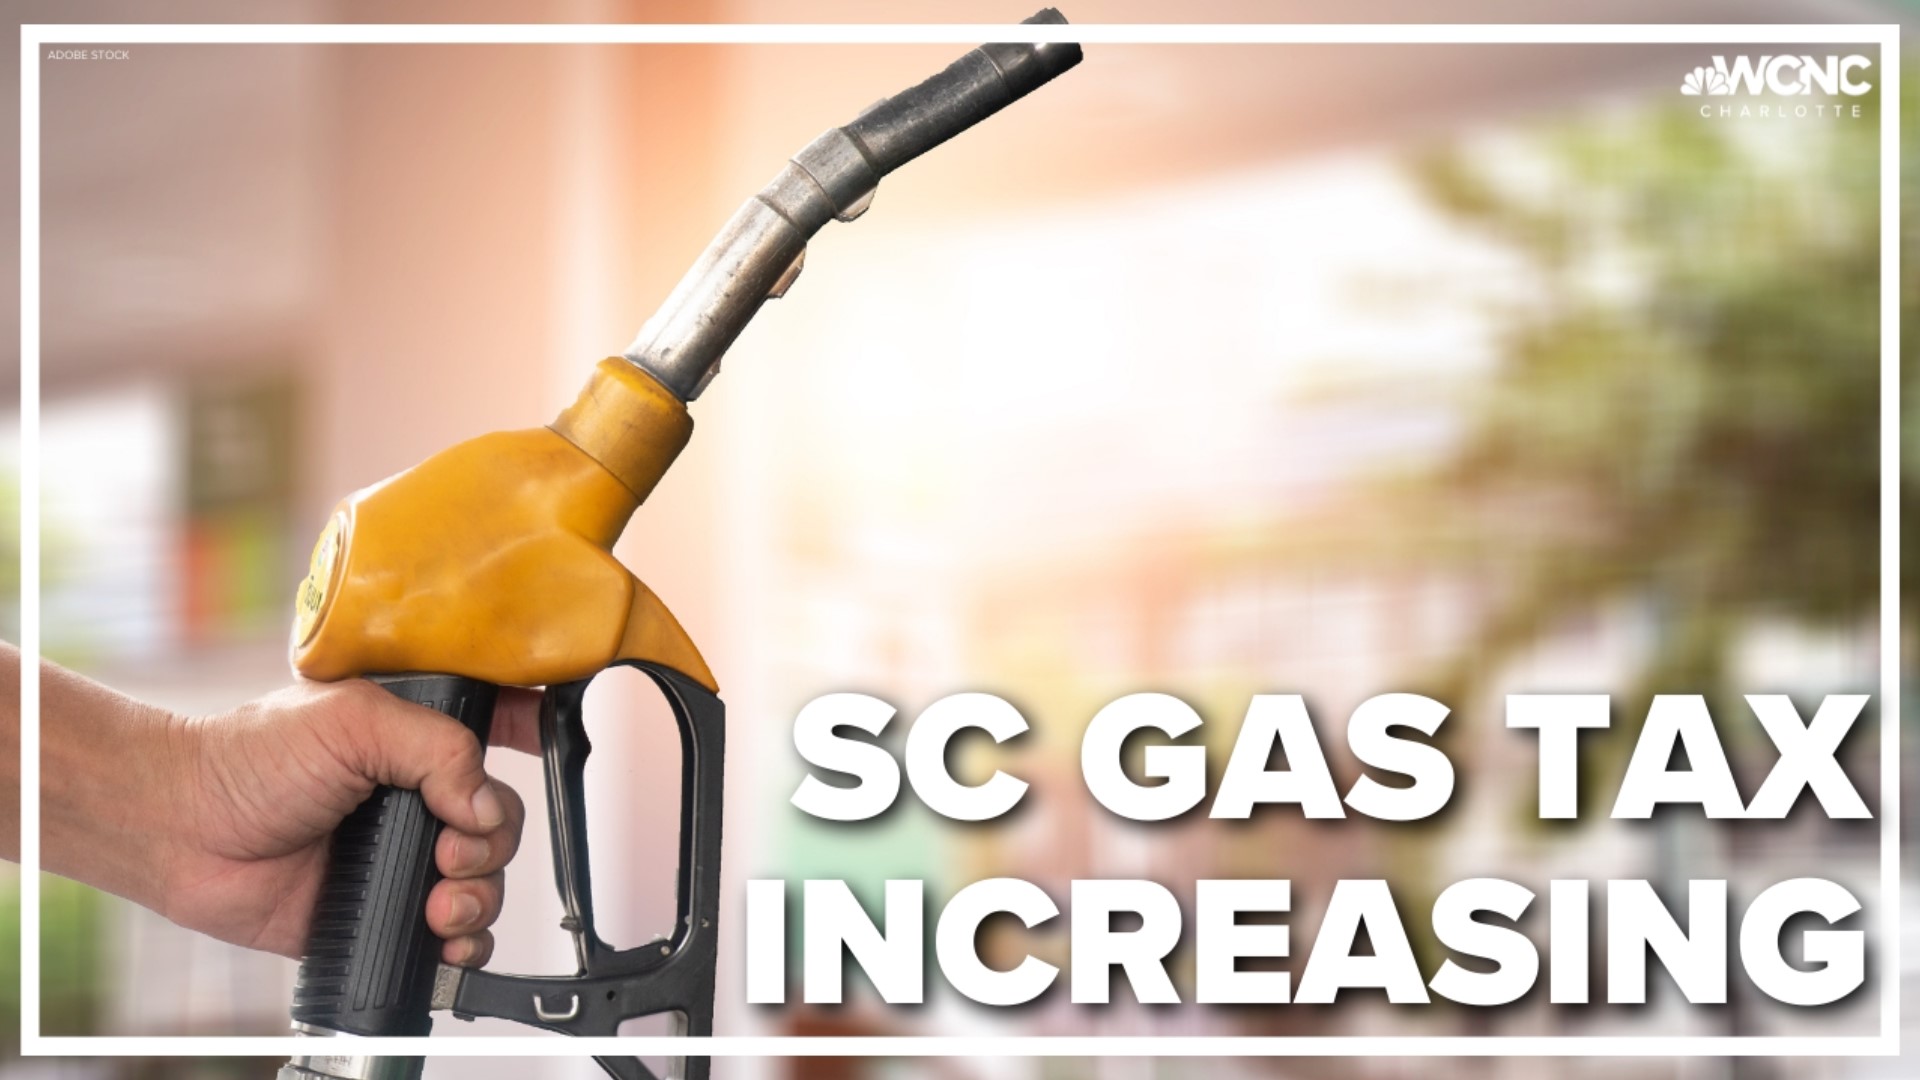 Drivers in South Carolina will see an increase at the pump. The state's gas tax is going up by two cents.